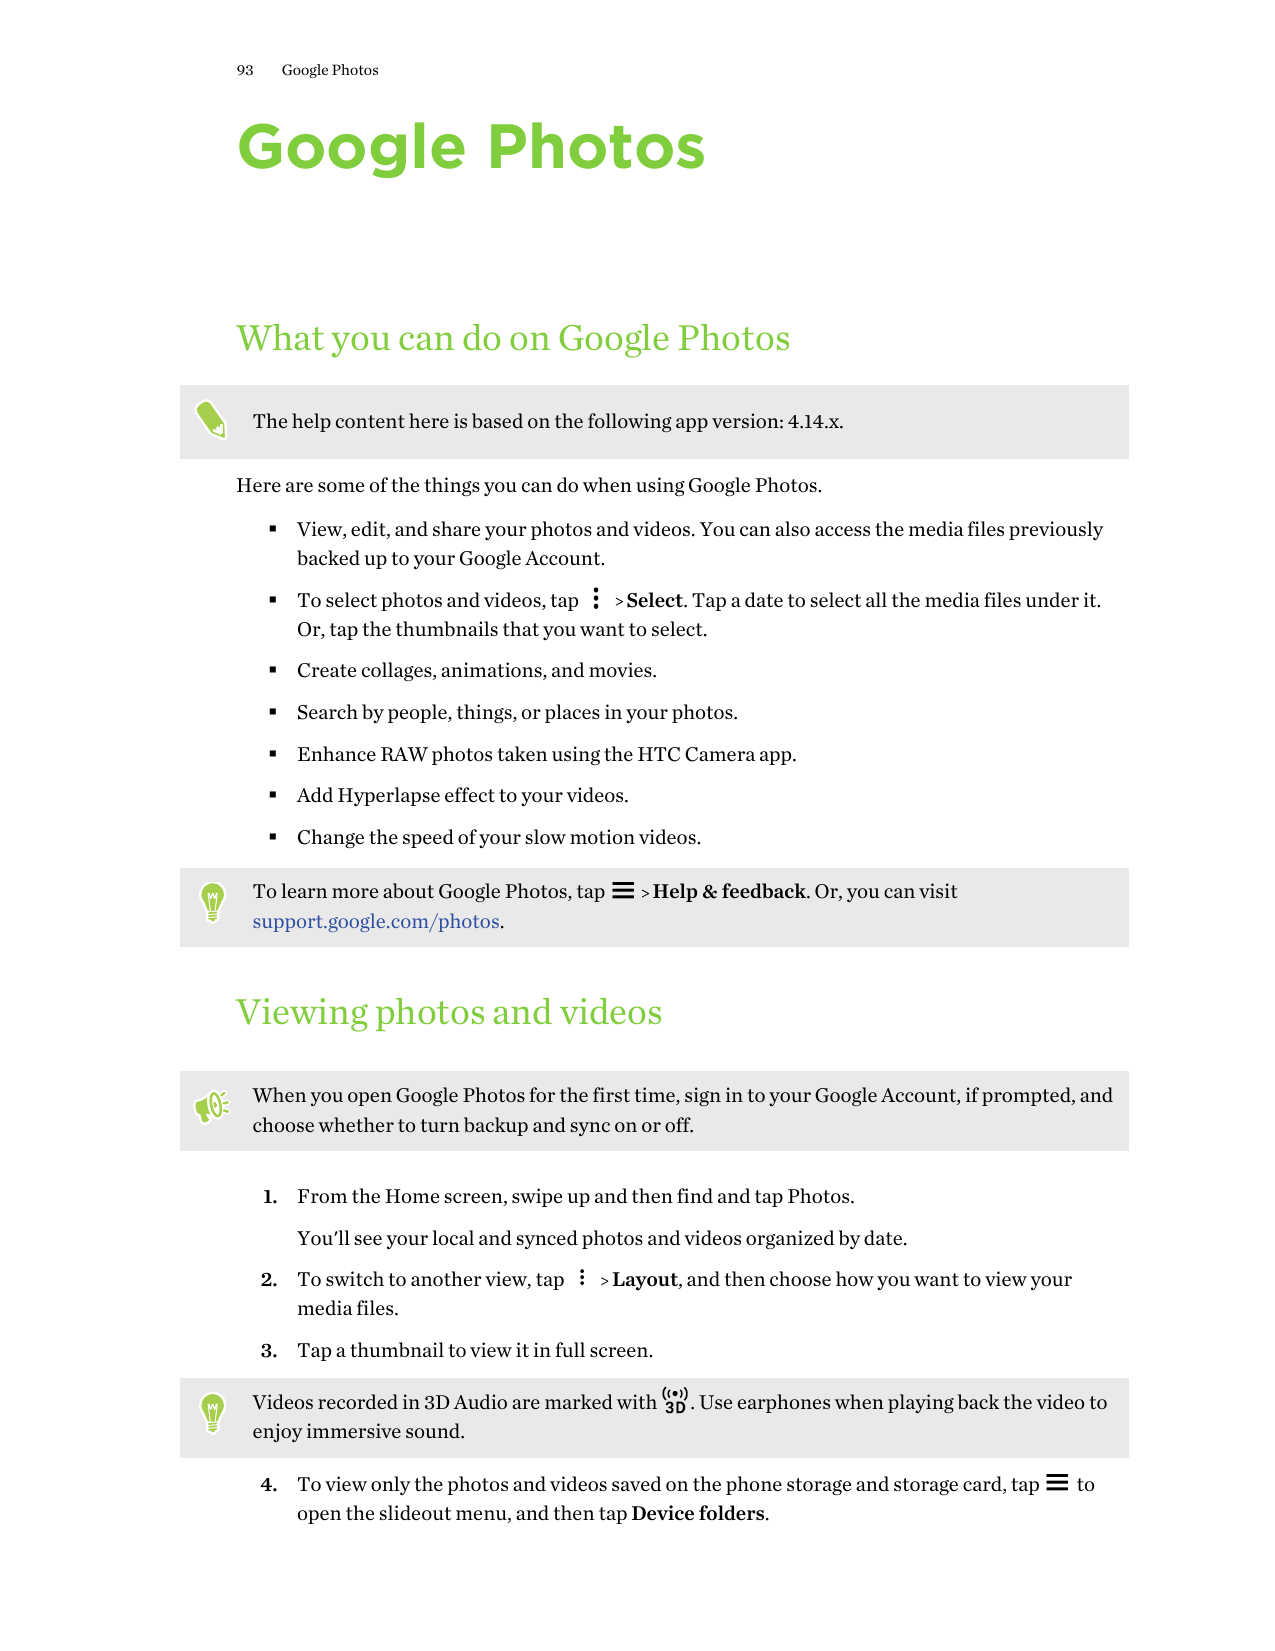 93Google PhotosGoogle PhotosWhat you can do on Google PhotosThe help content here is based on the following app version: 4.14.x.